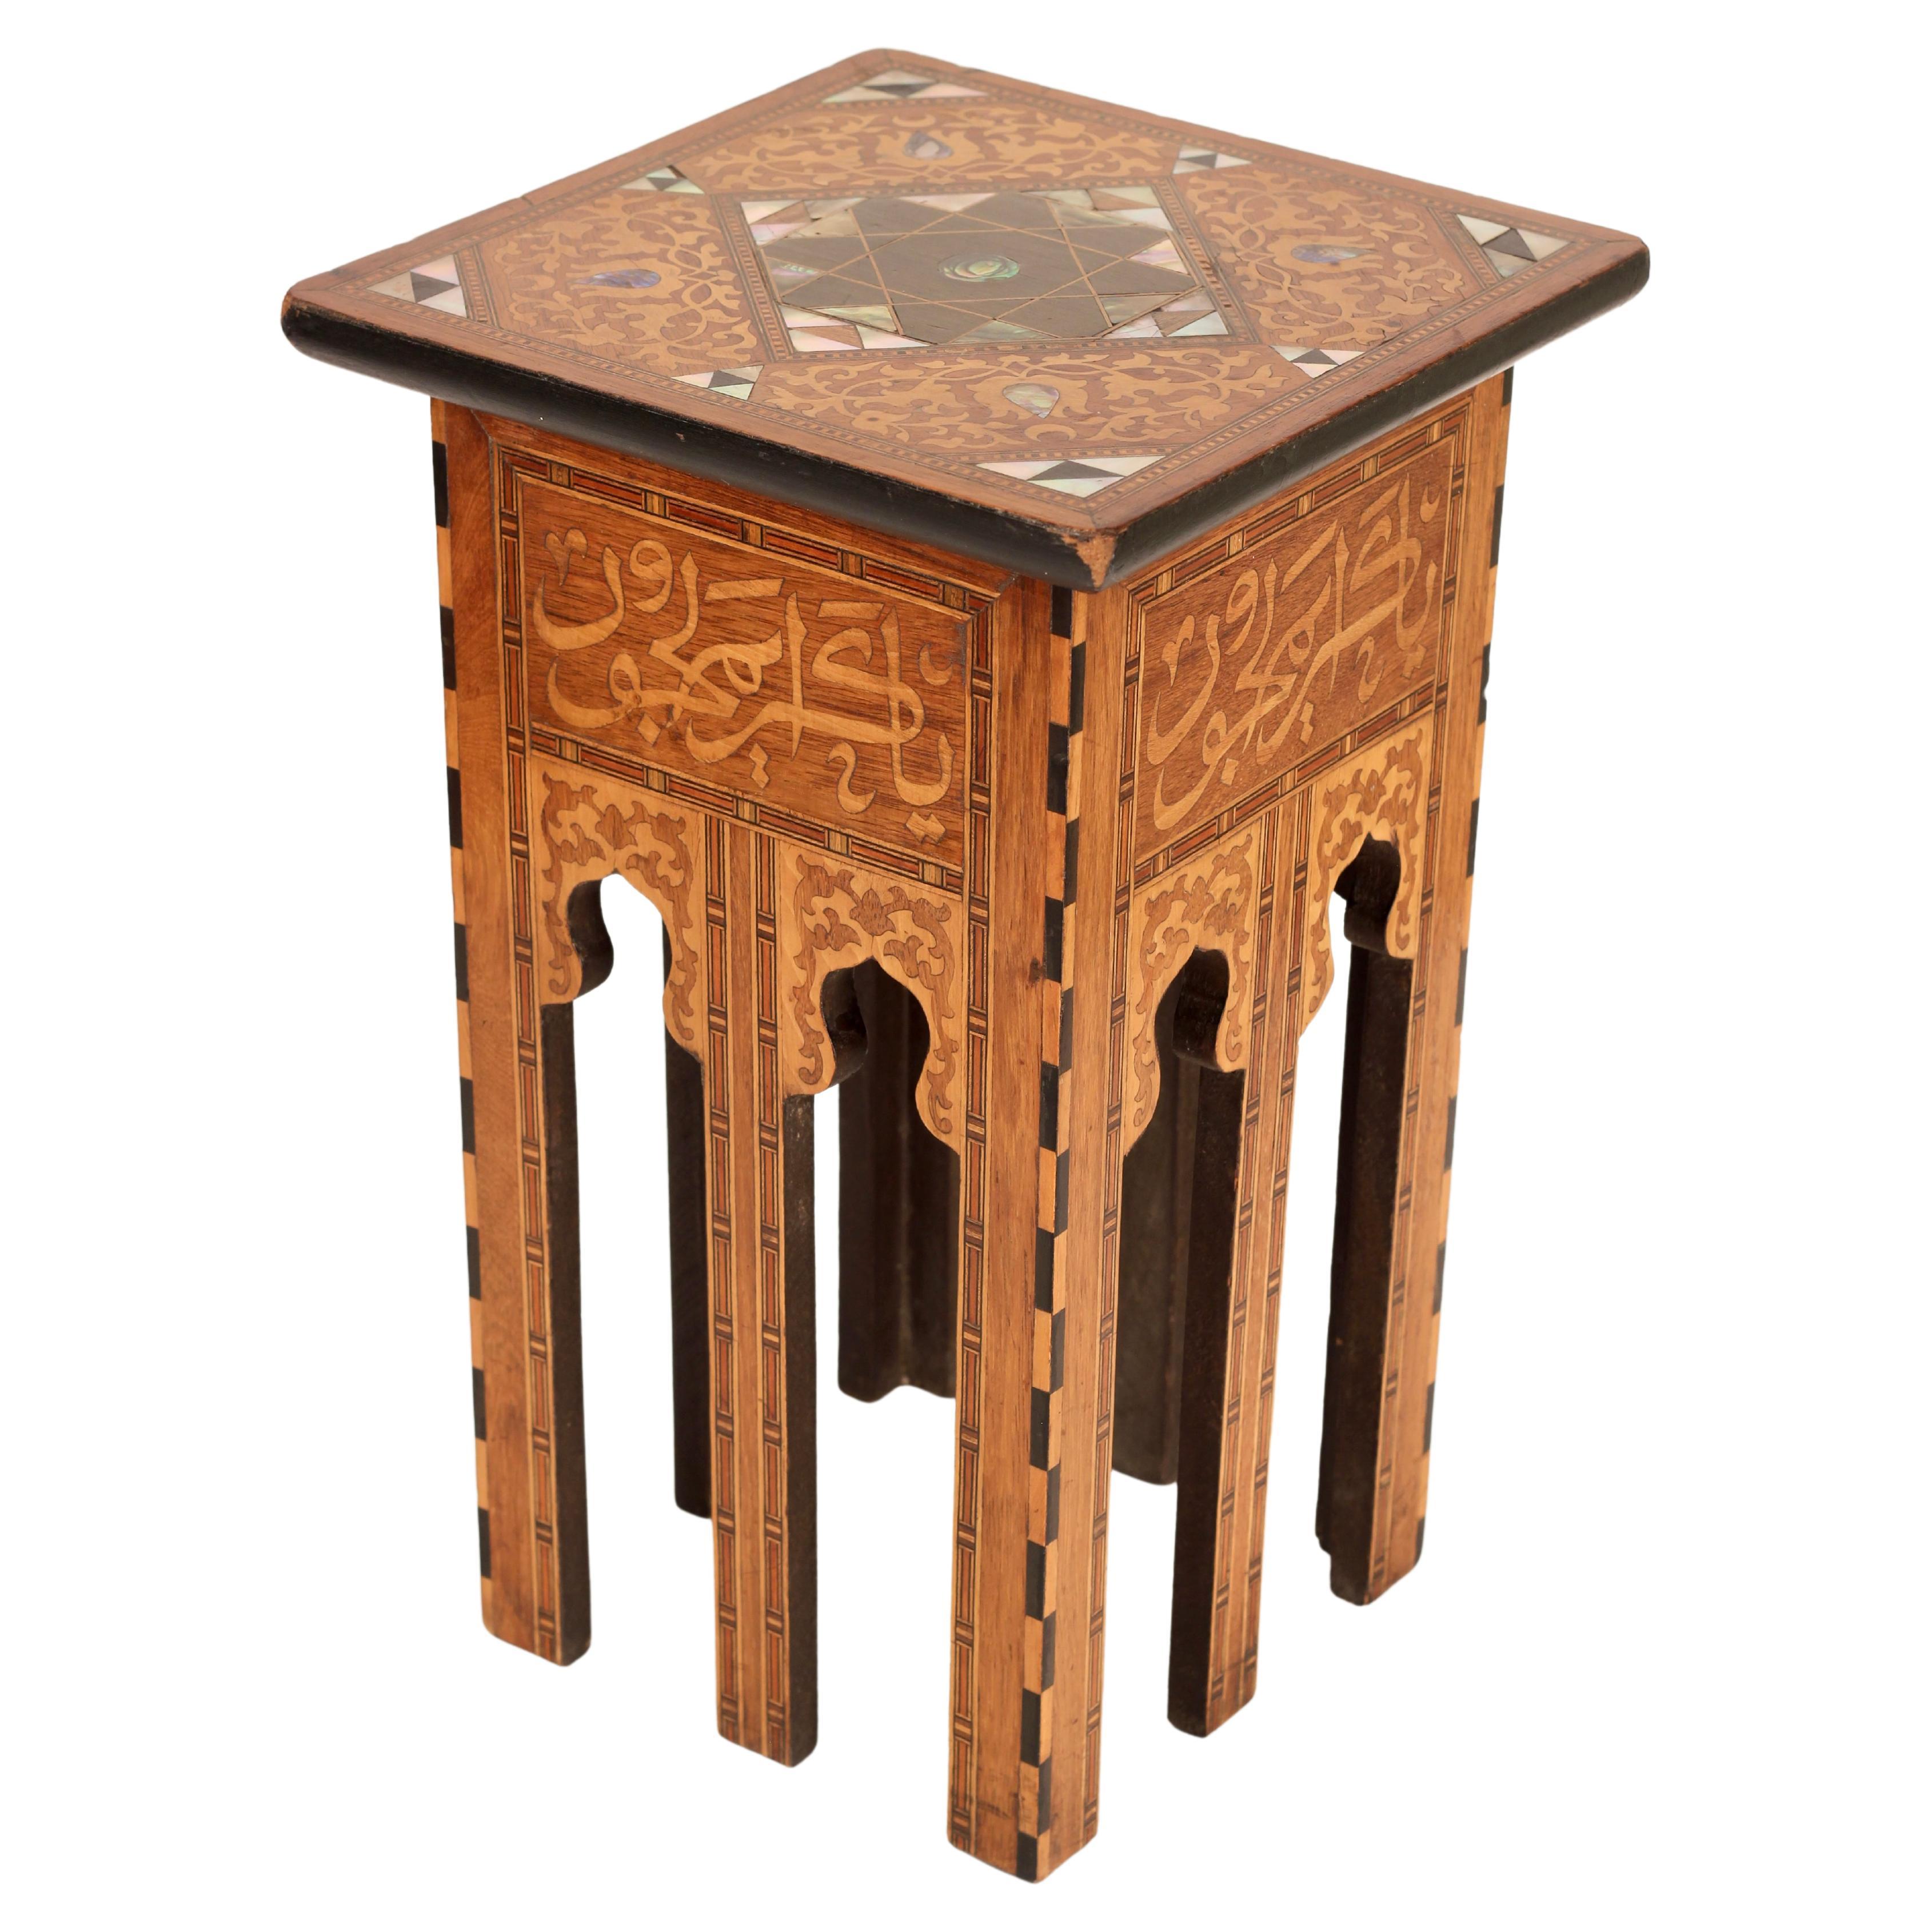 Boho Chic Style 20th Century Mother of Pearl and Wooden Inlay Liberty & Co Table